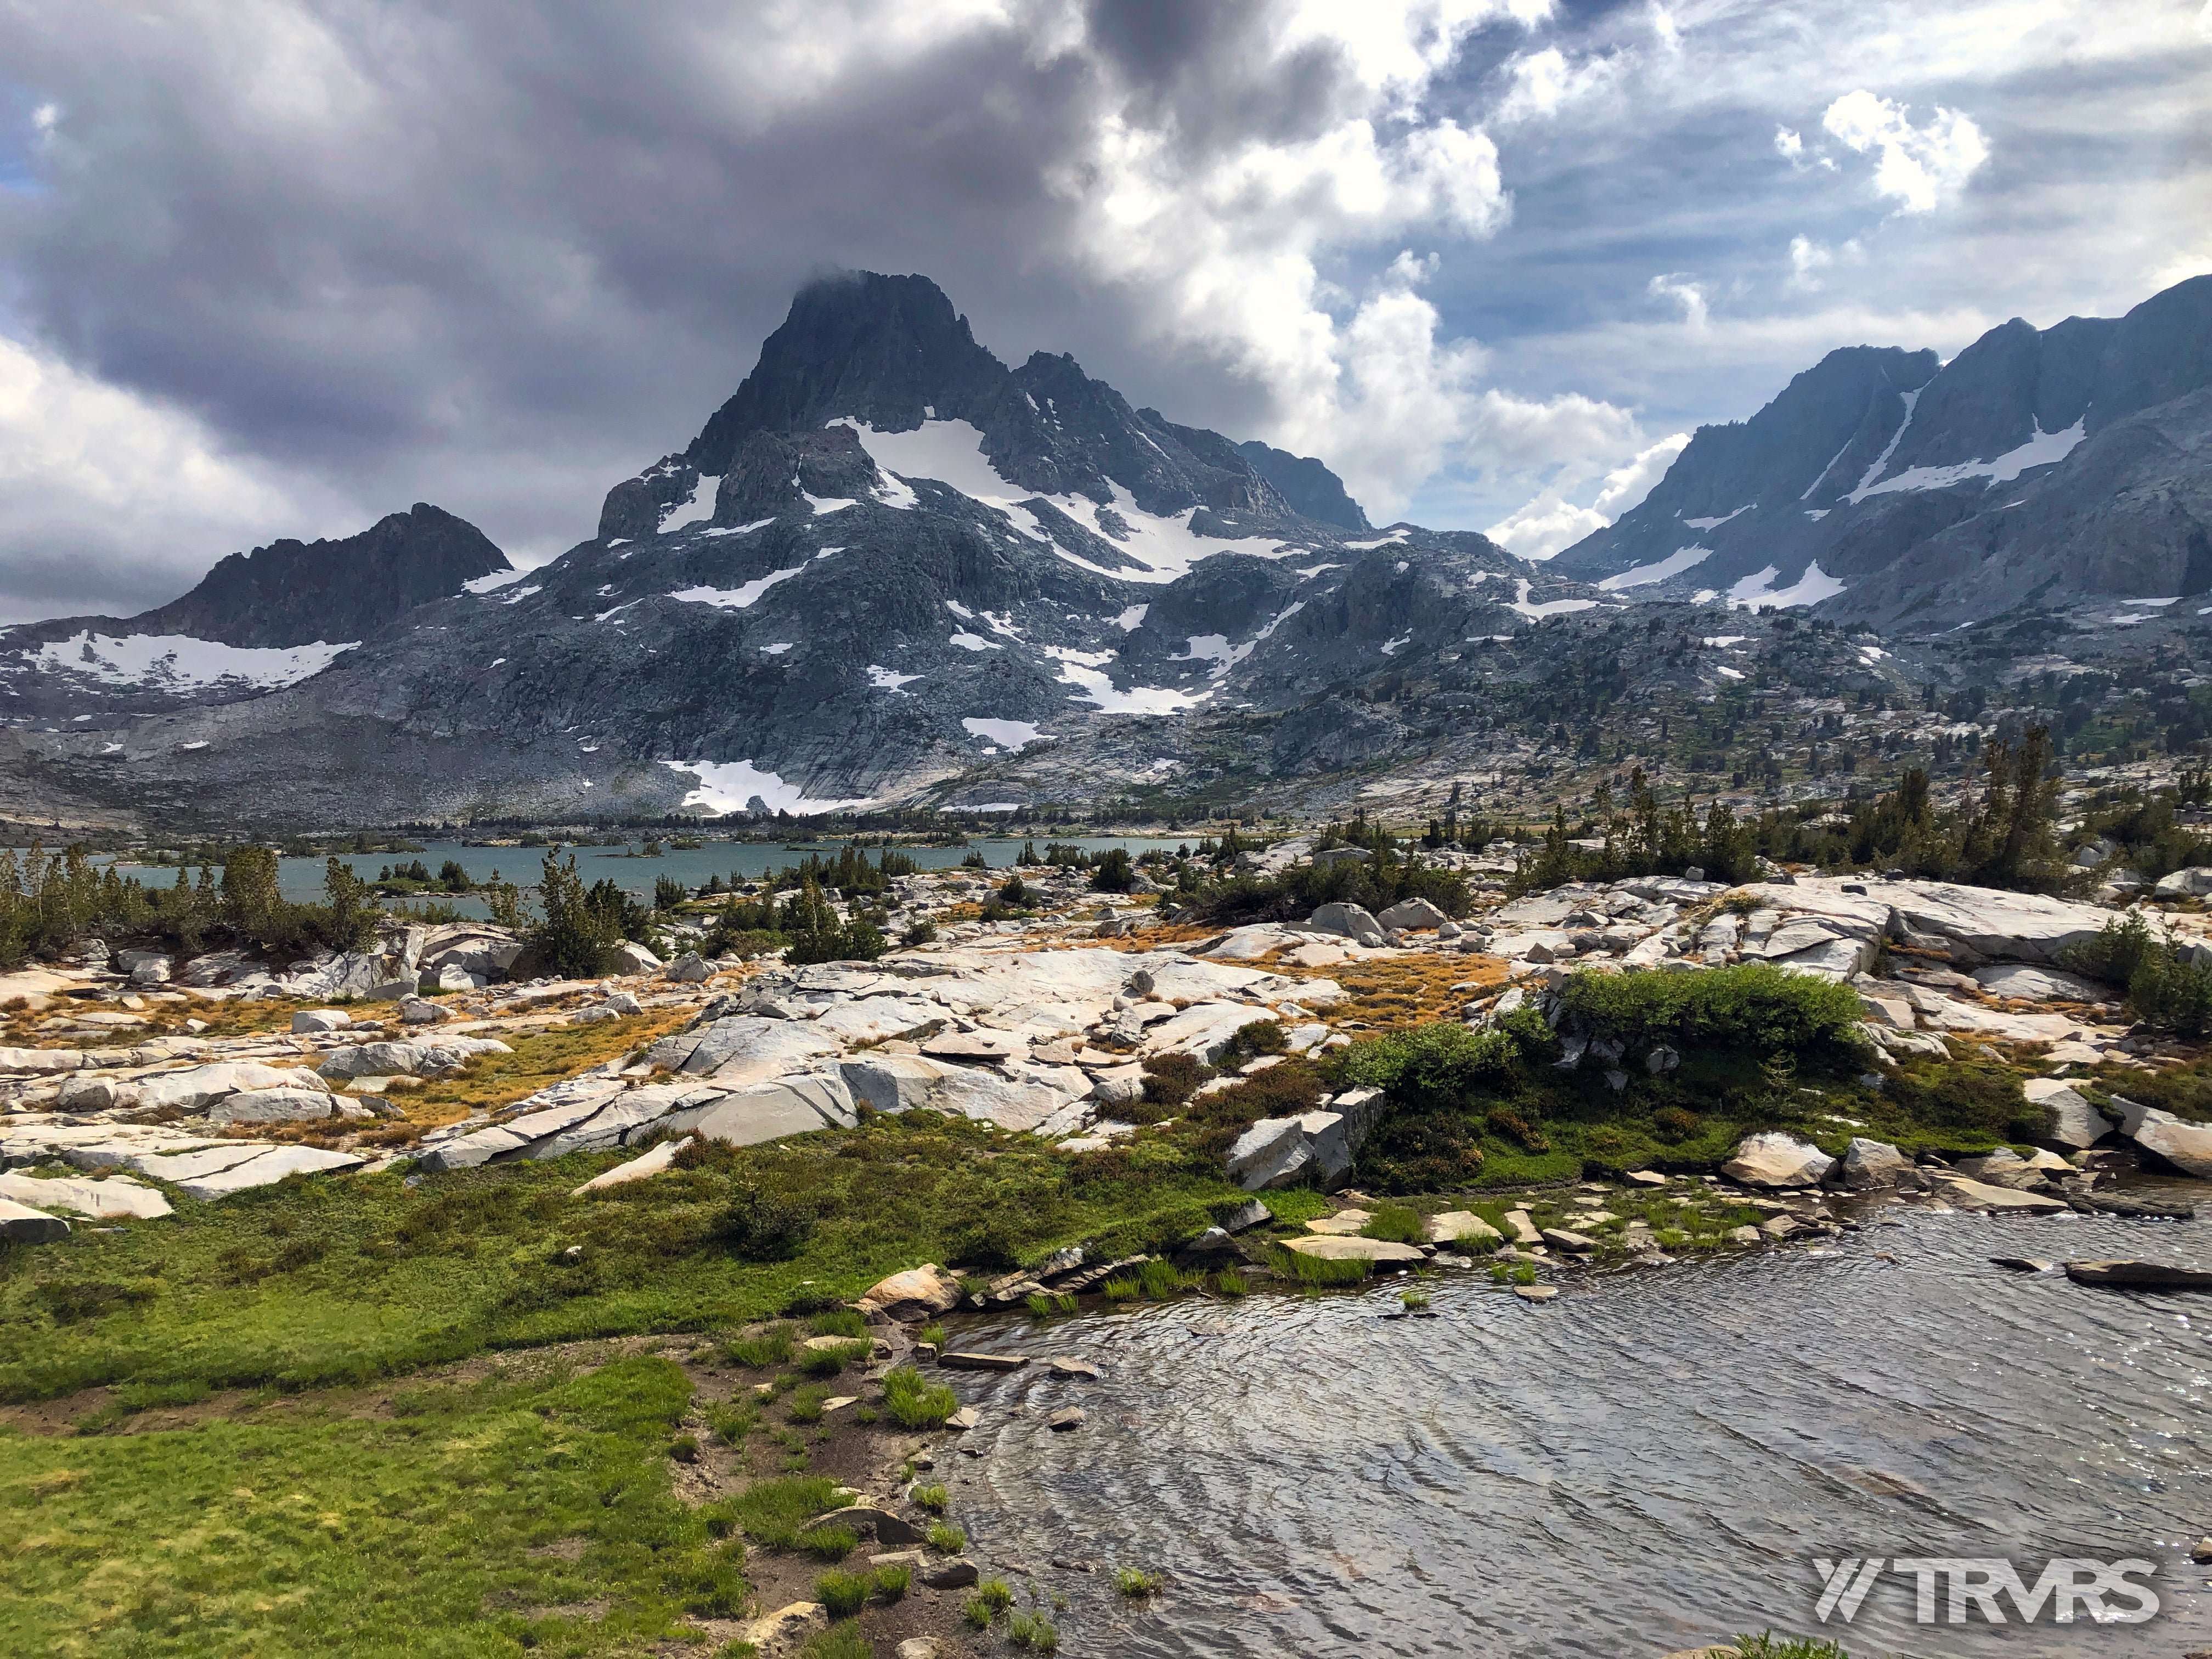 Banner Peak Ritter-Banner Saddle, Lake Catherine, Glacier Pass, Thousand Island Lake, River Trail, Pacific Crest Trail, Middle Fork, Agnew Meadow, Ansel Adams Wilderness, Mammoth Lakes, Sierra Nevada | TRVRS Apparel